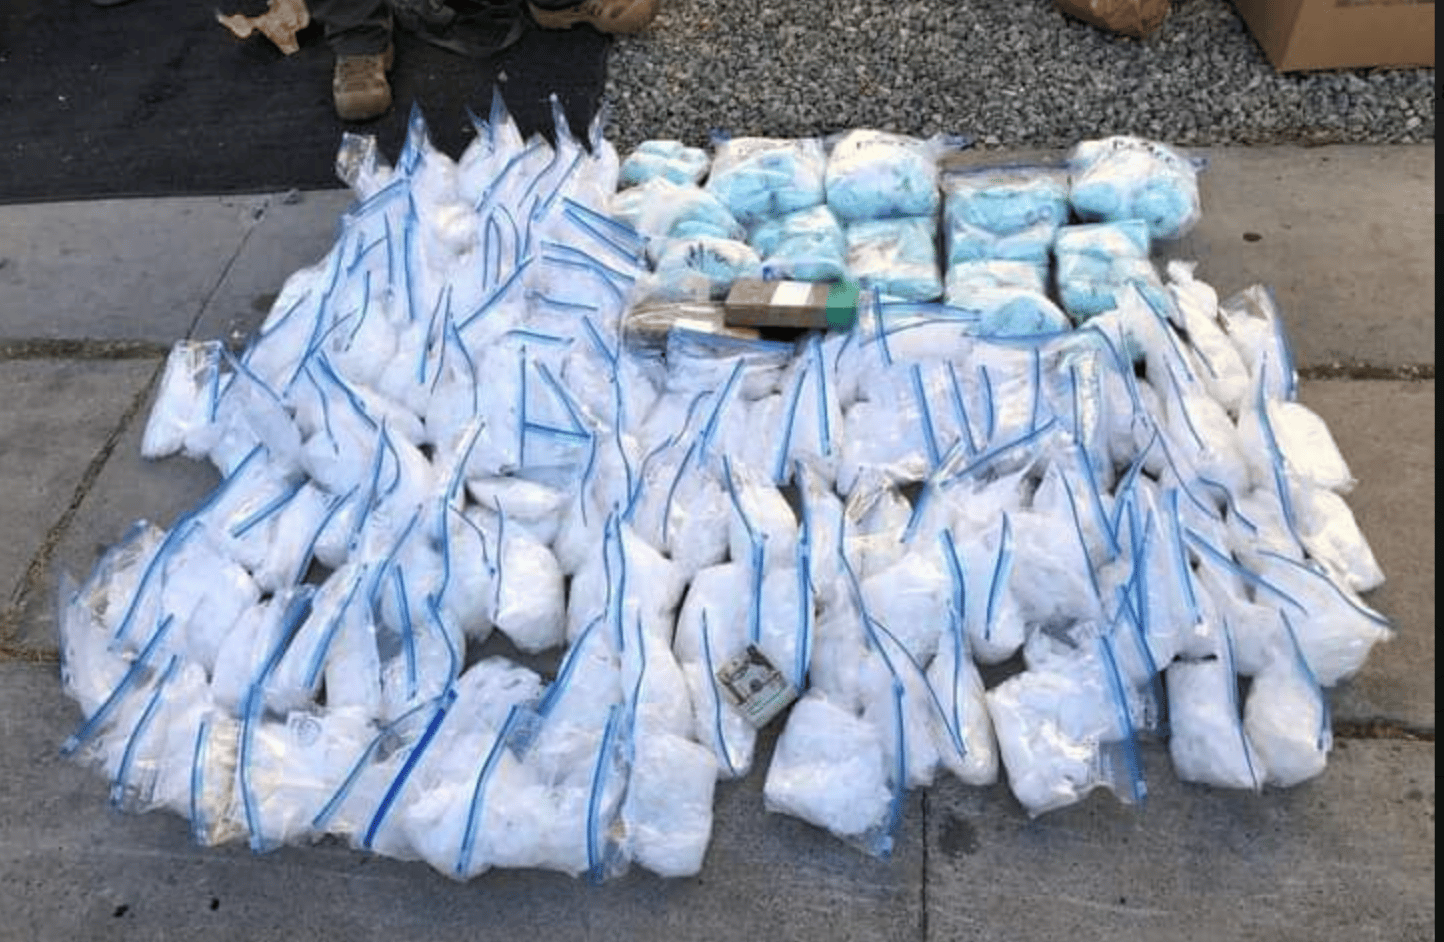 Authorities Seize Large Quantities of Fentanyl and Meth Worth $3MIL UDS in Huntington Park, California, United States - 10 May 2022